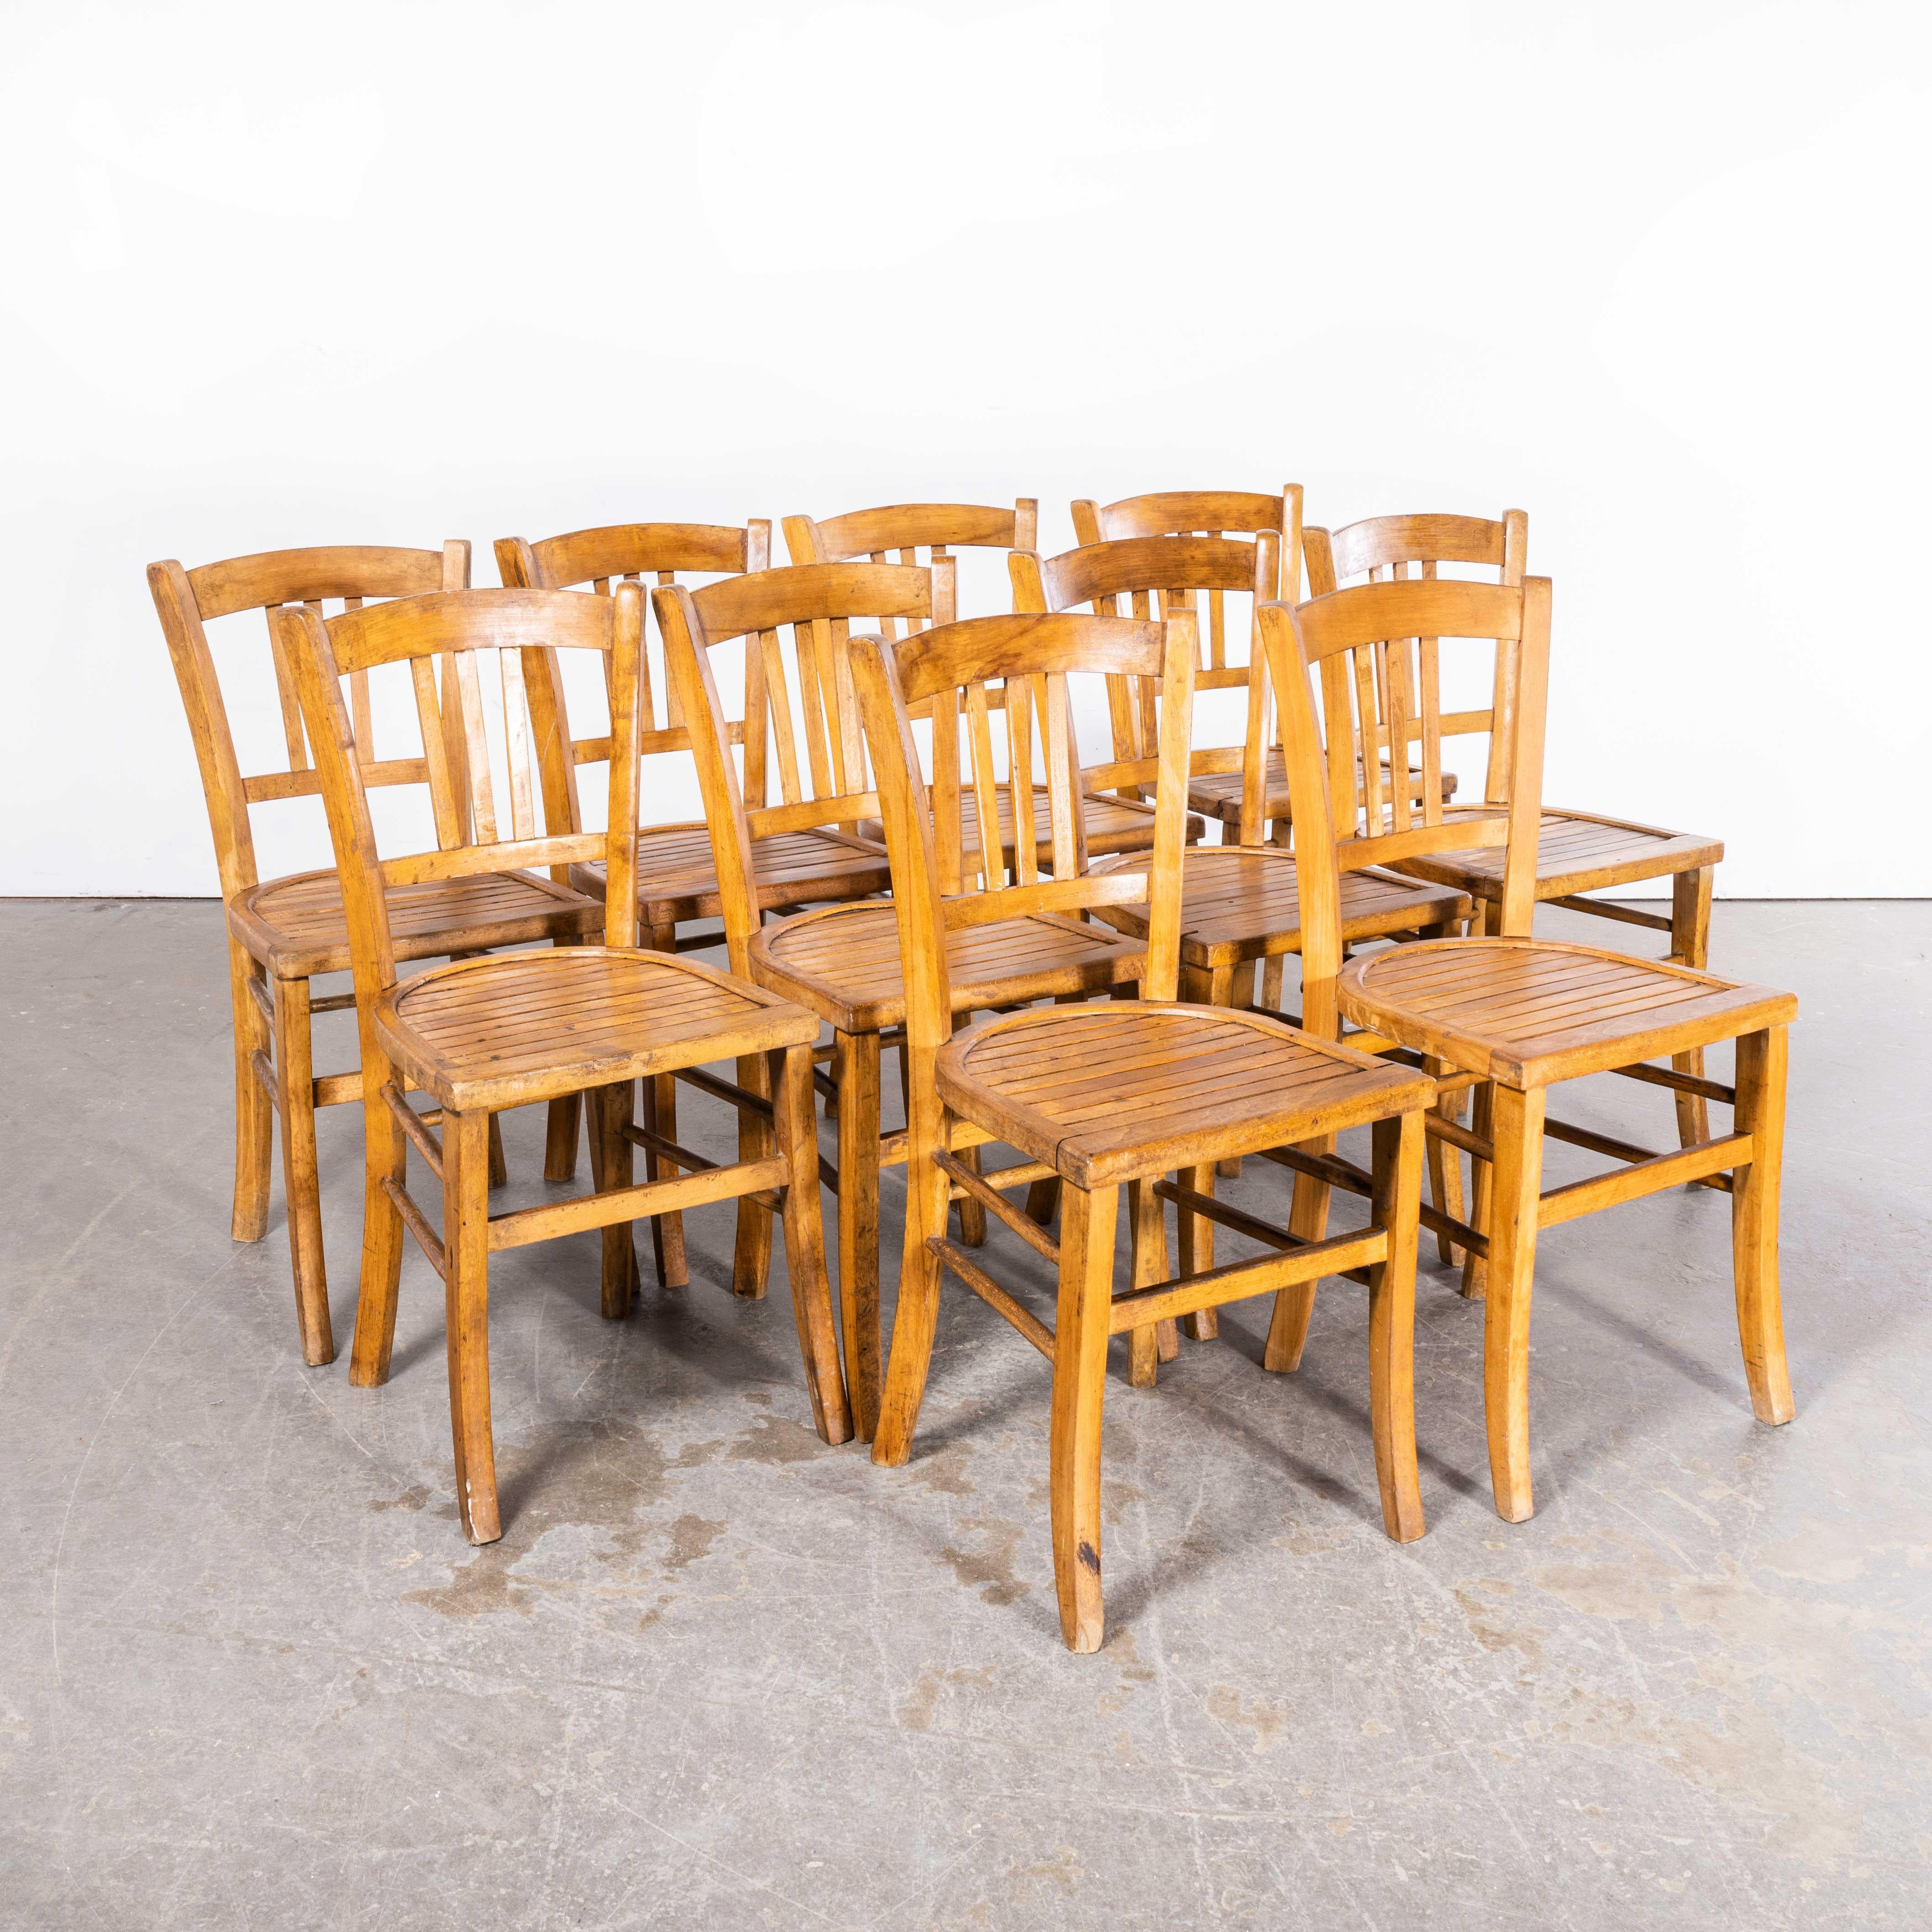 1950's Original French Slatted Farmhouse Chairs From Provence - Set Of Ten For Sale 3